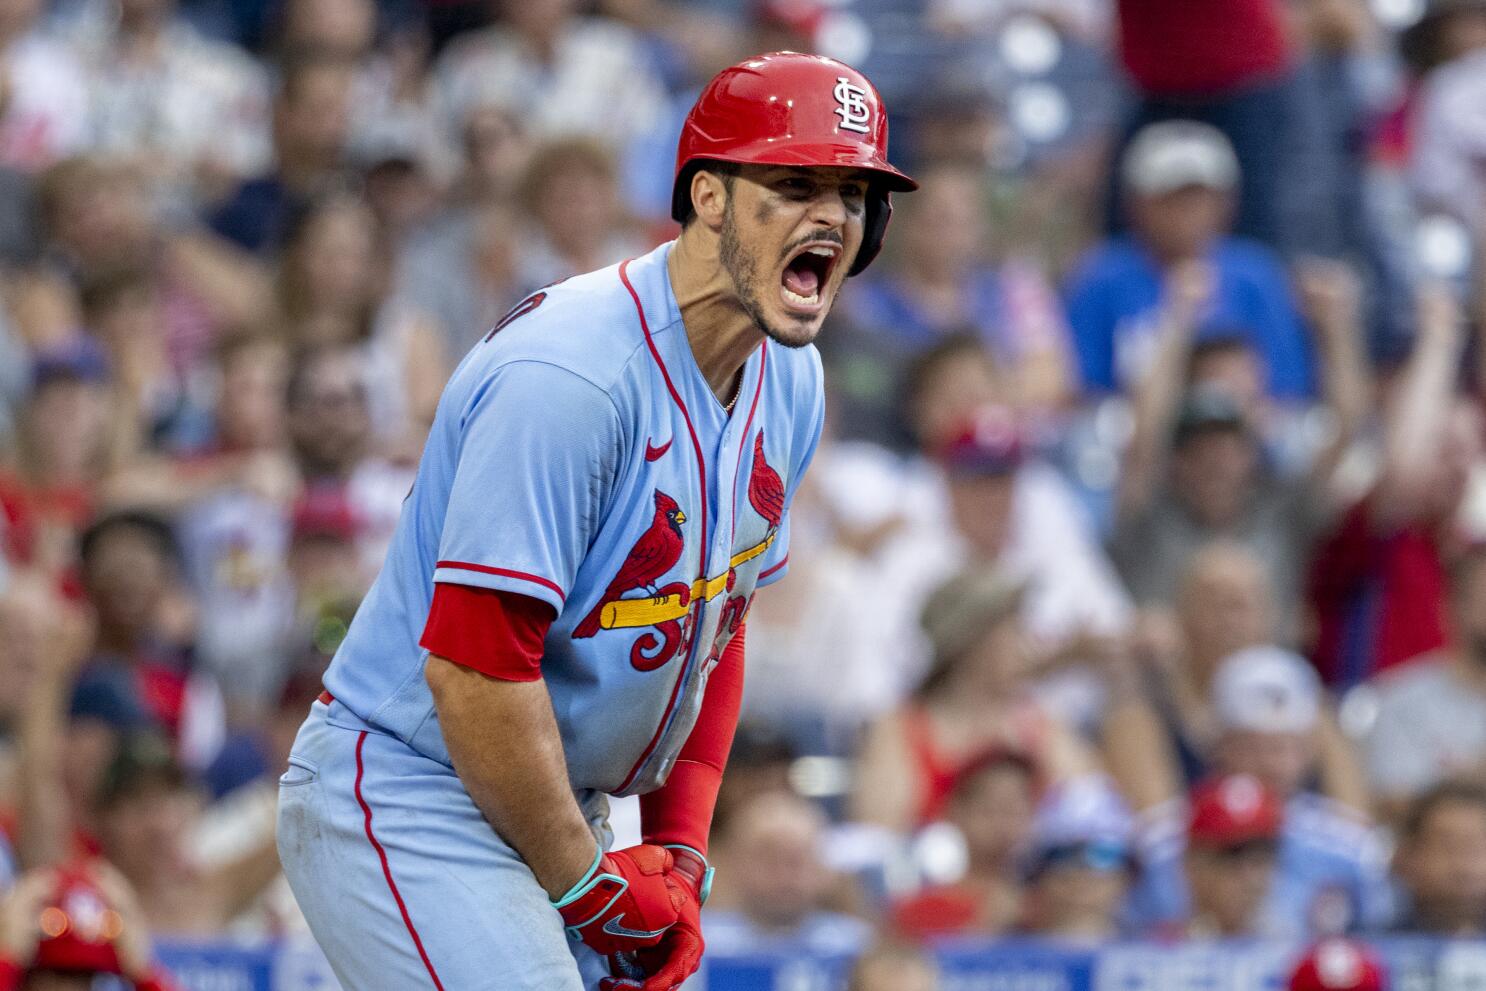 Cardinals power past Mets 11-4 for three-game sweep